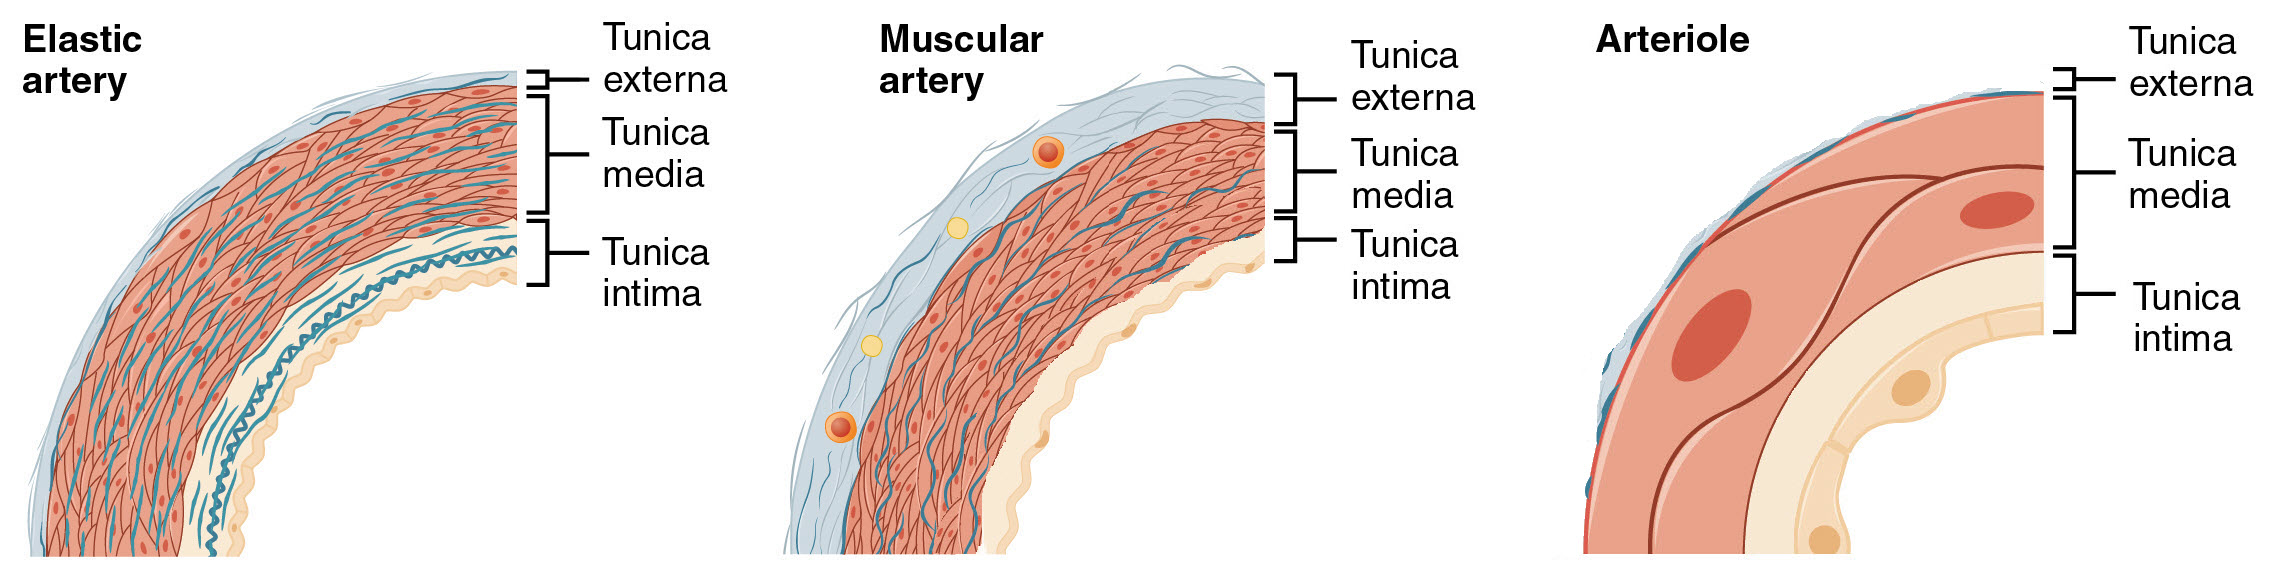 Comparison of vessel tunics in different types of arteries